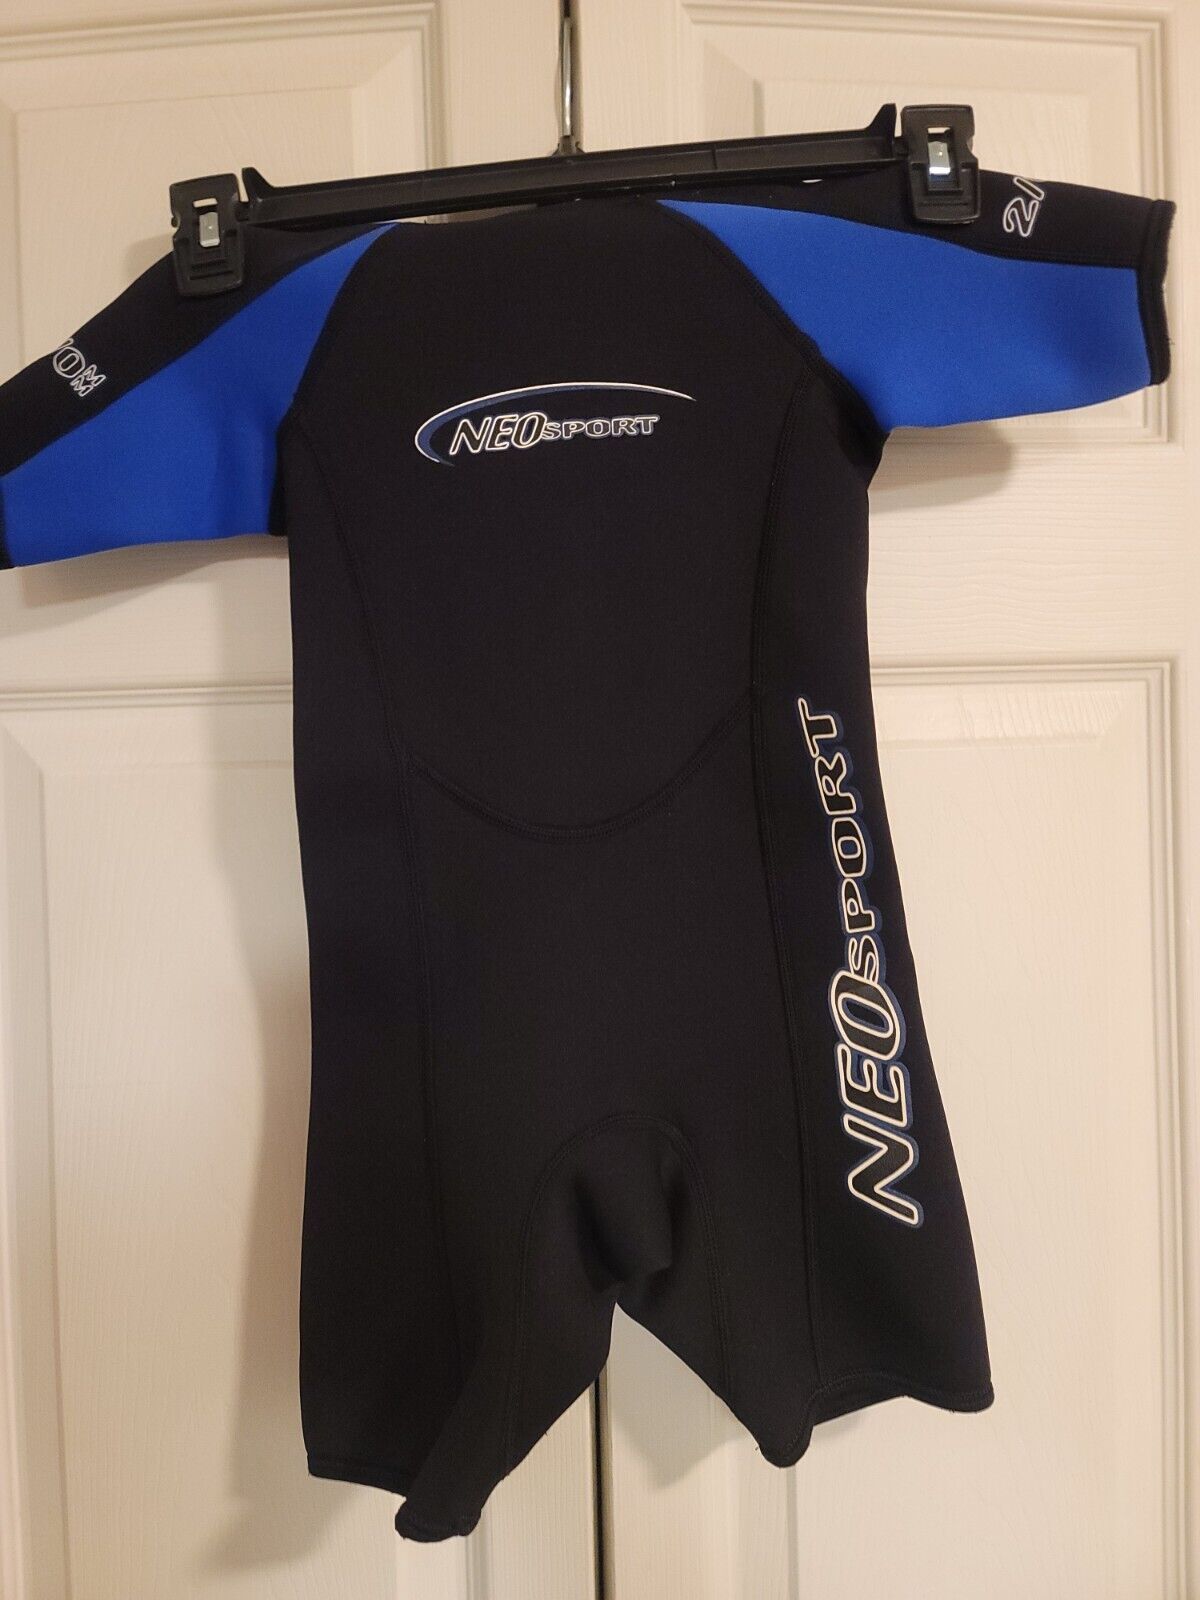 Neo Sport Size 4 Child Shorty Neoprene Wetsuit, Back Zip, Great First Wet Suit!